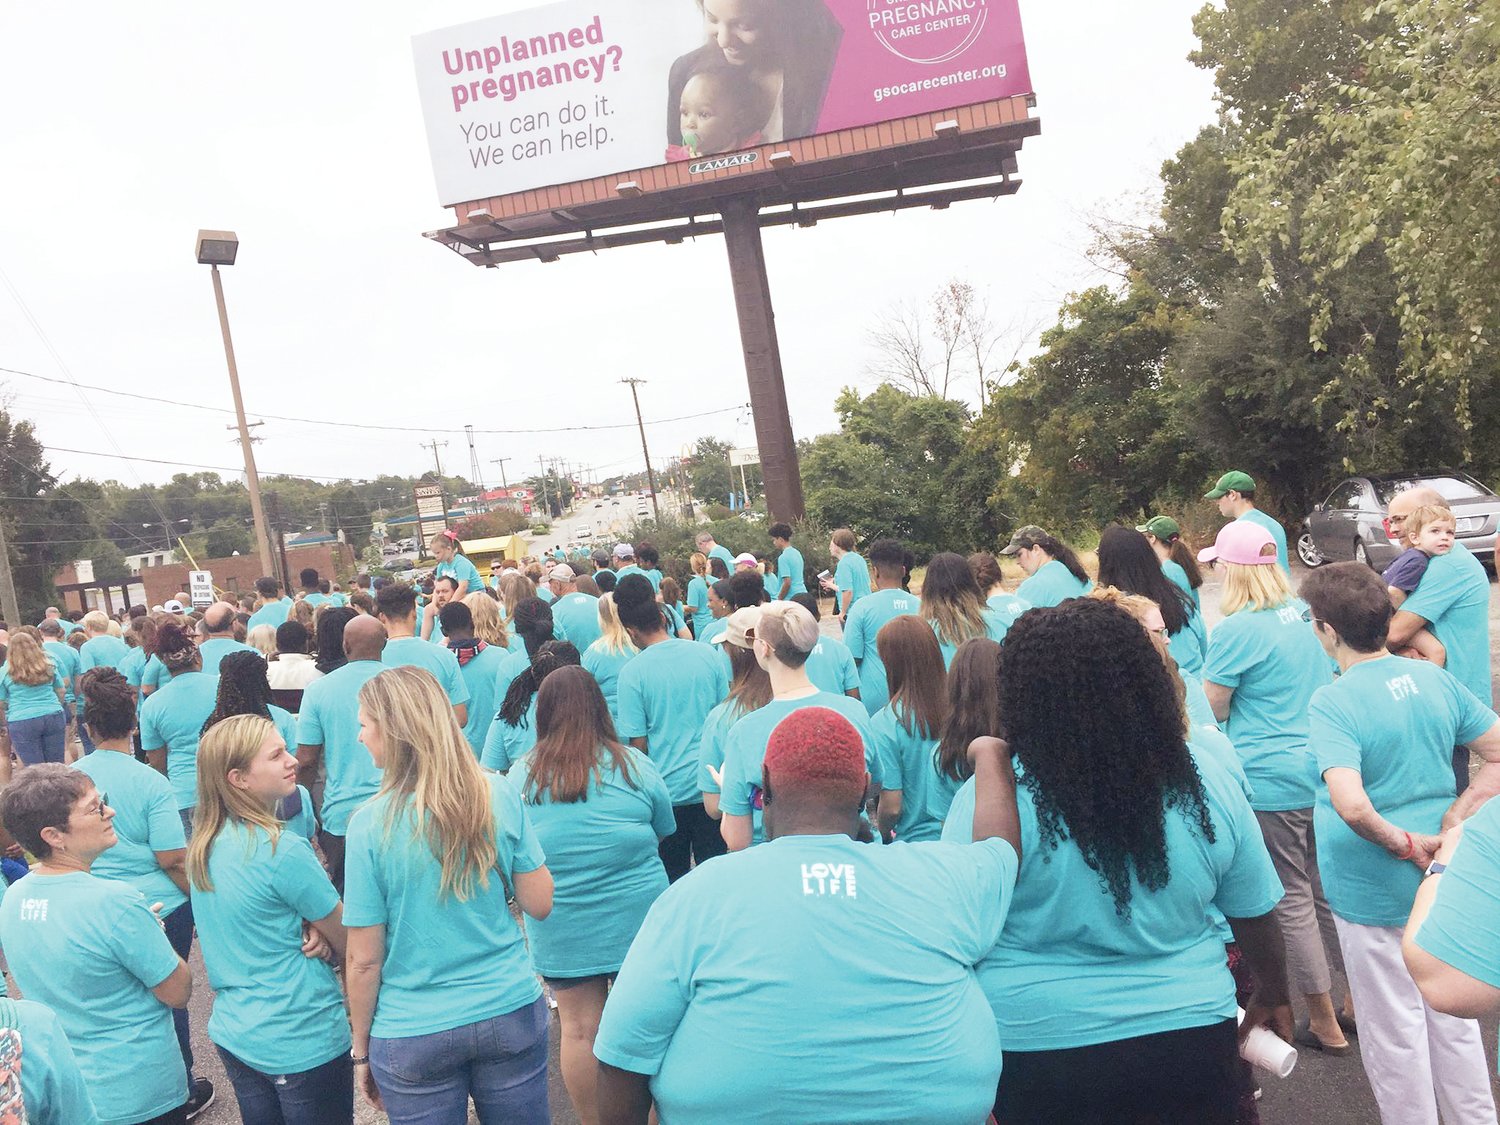 Several Siler City churches/organizations were represented a protest against abortion in Greensboro on Sept. 14. Members from First Wesleyan Church, Freedom Family Church, Loves Creek Baptist Church and The Hangout of Siler City are pictured.